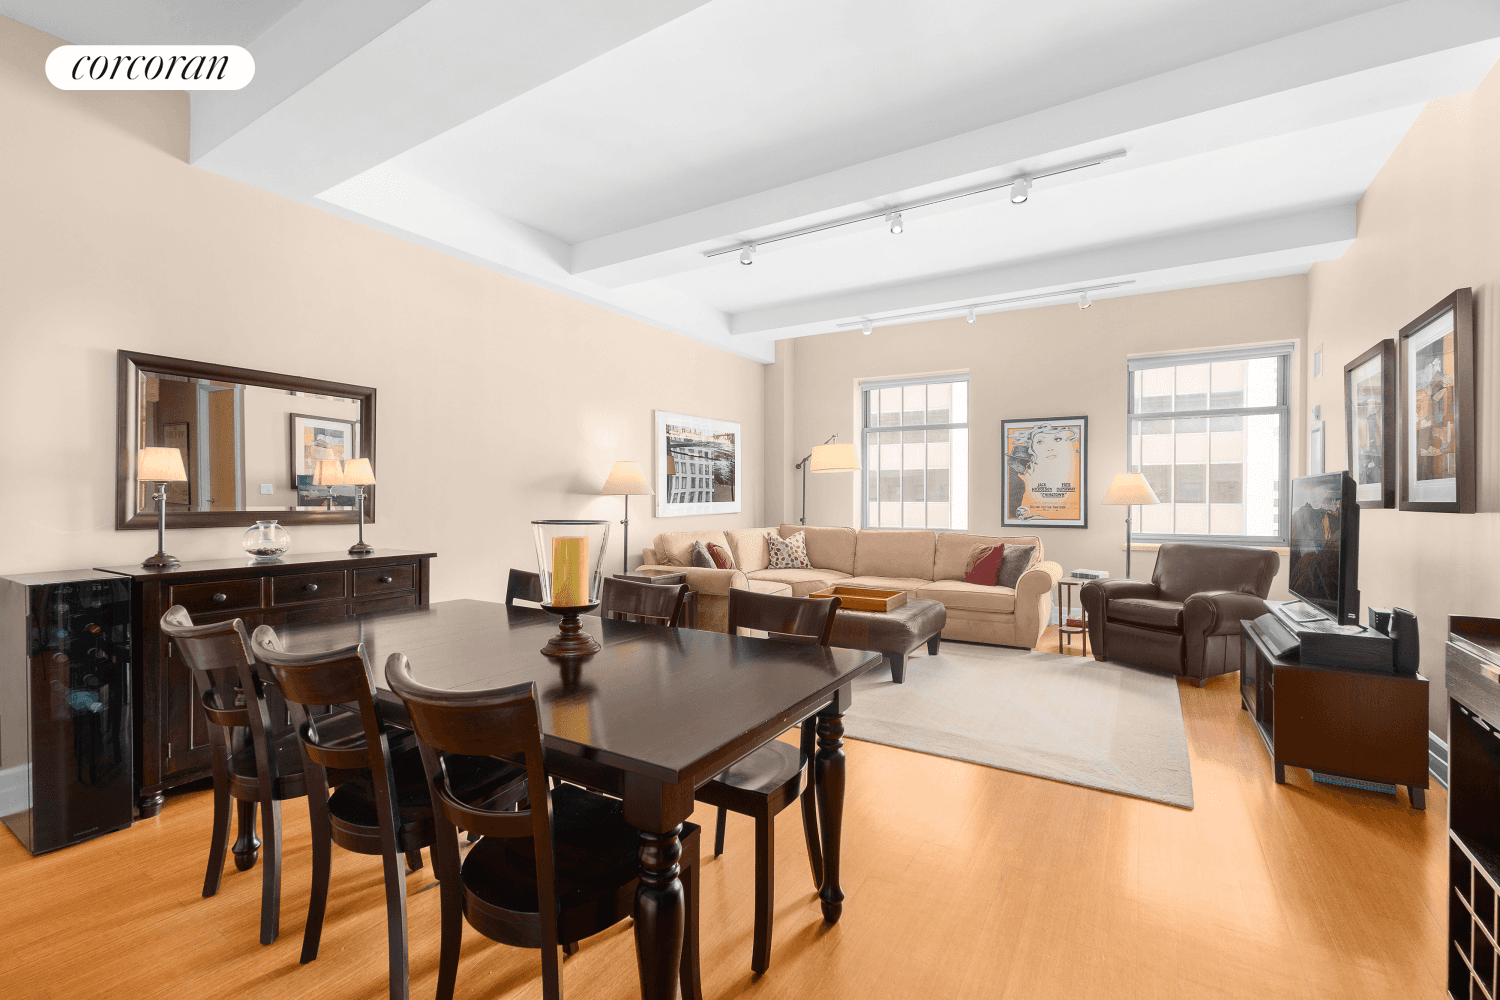 Welcome to 110 Livingston Street 10E, a sprawling 2 bed, 2 bath apartment offering 1, 227 sqft of living space within a full servicehistoric Beaux Arts style landmarkbuilding.